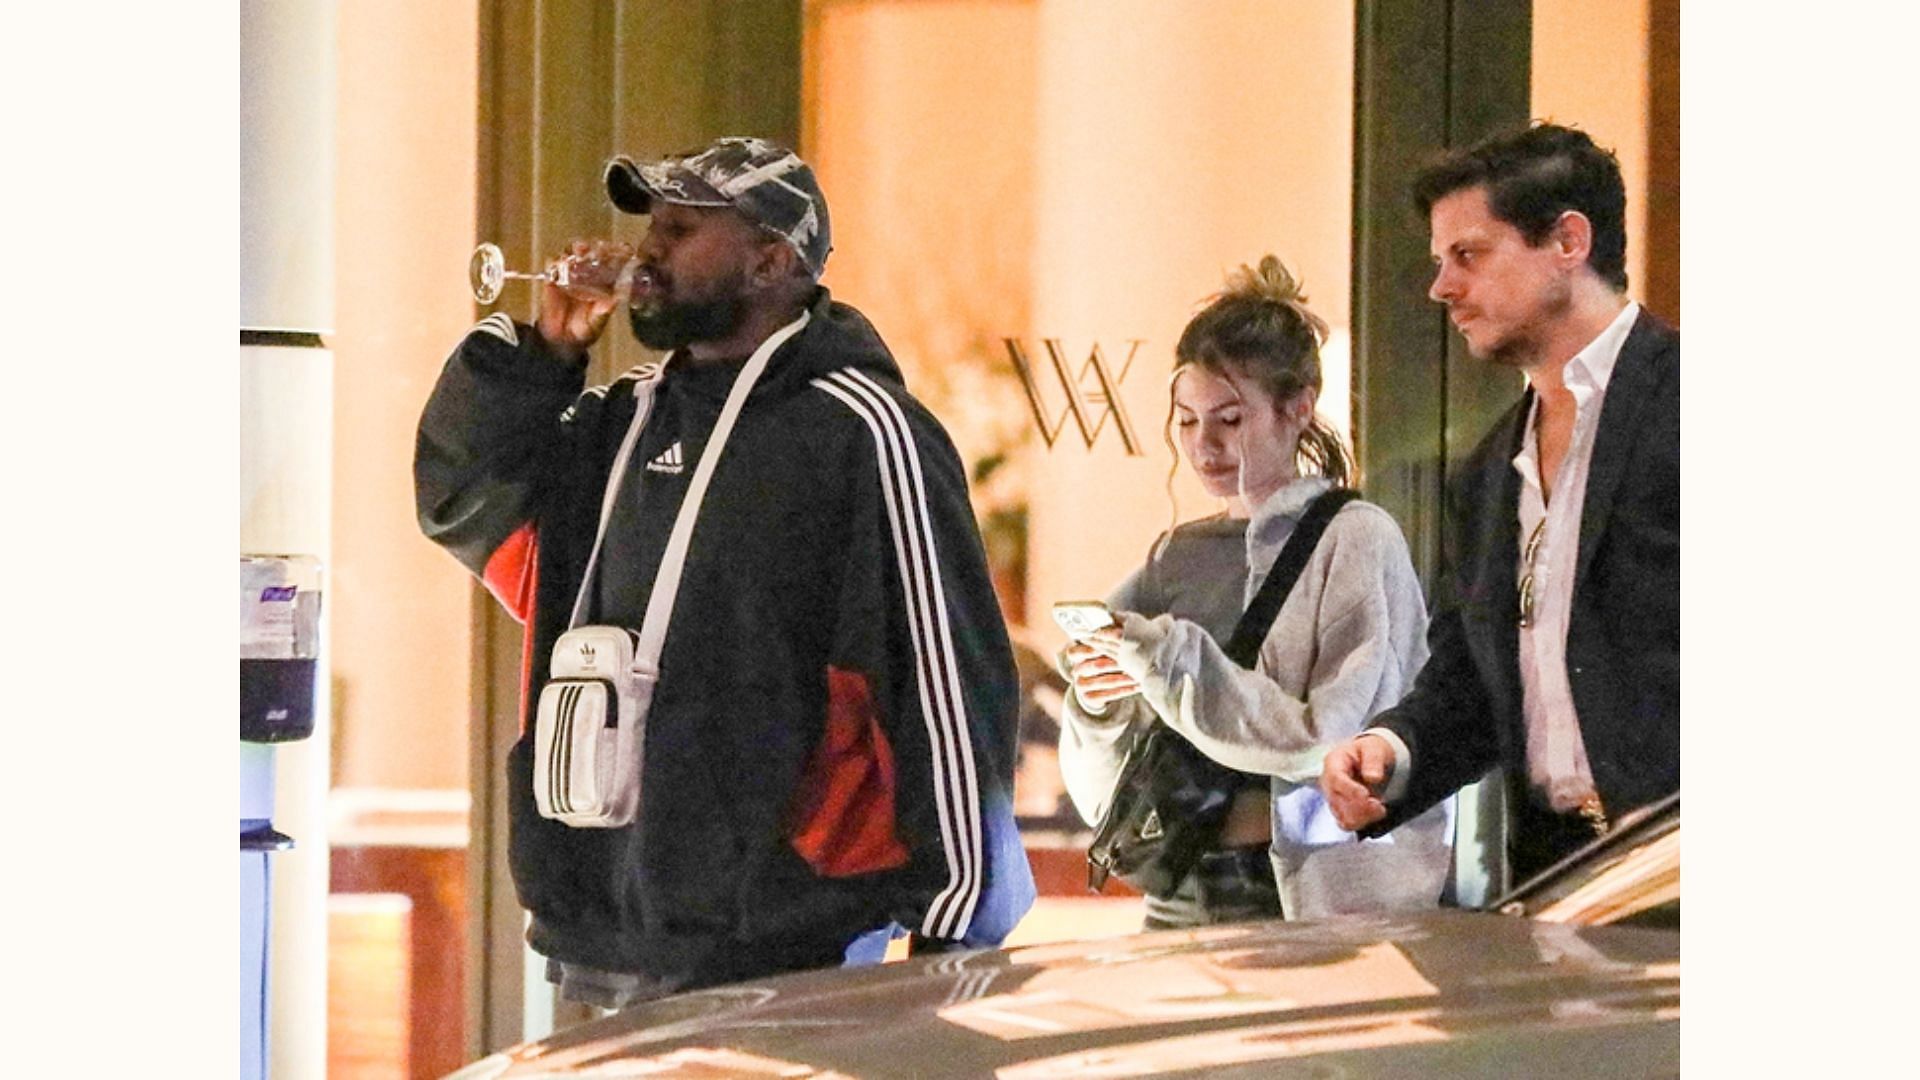 Ye was seen leaving the Waldorf Astoria with right-winger Yiannopoulos (image Getty/Unknown)